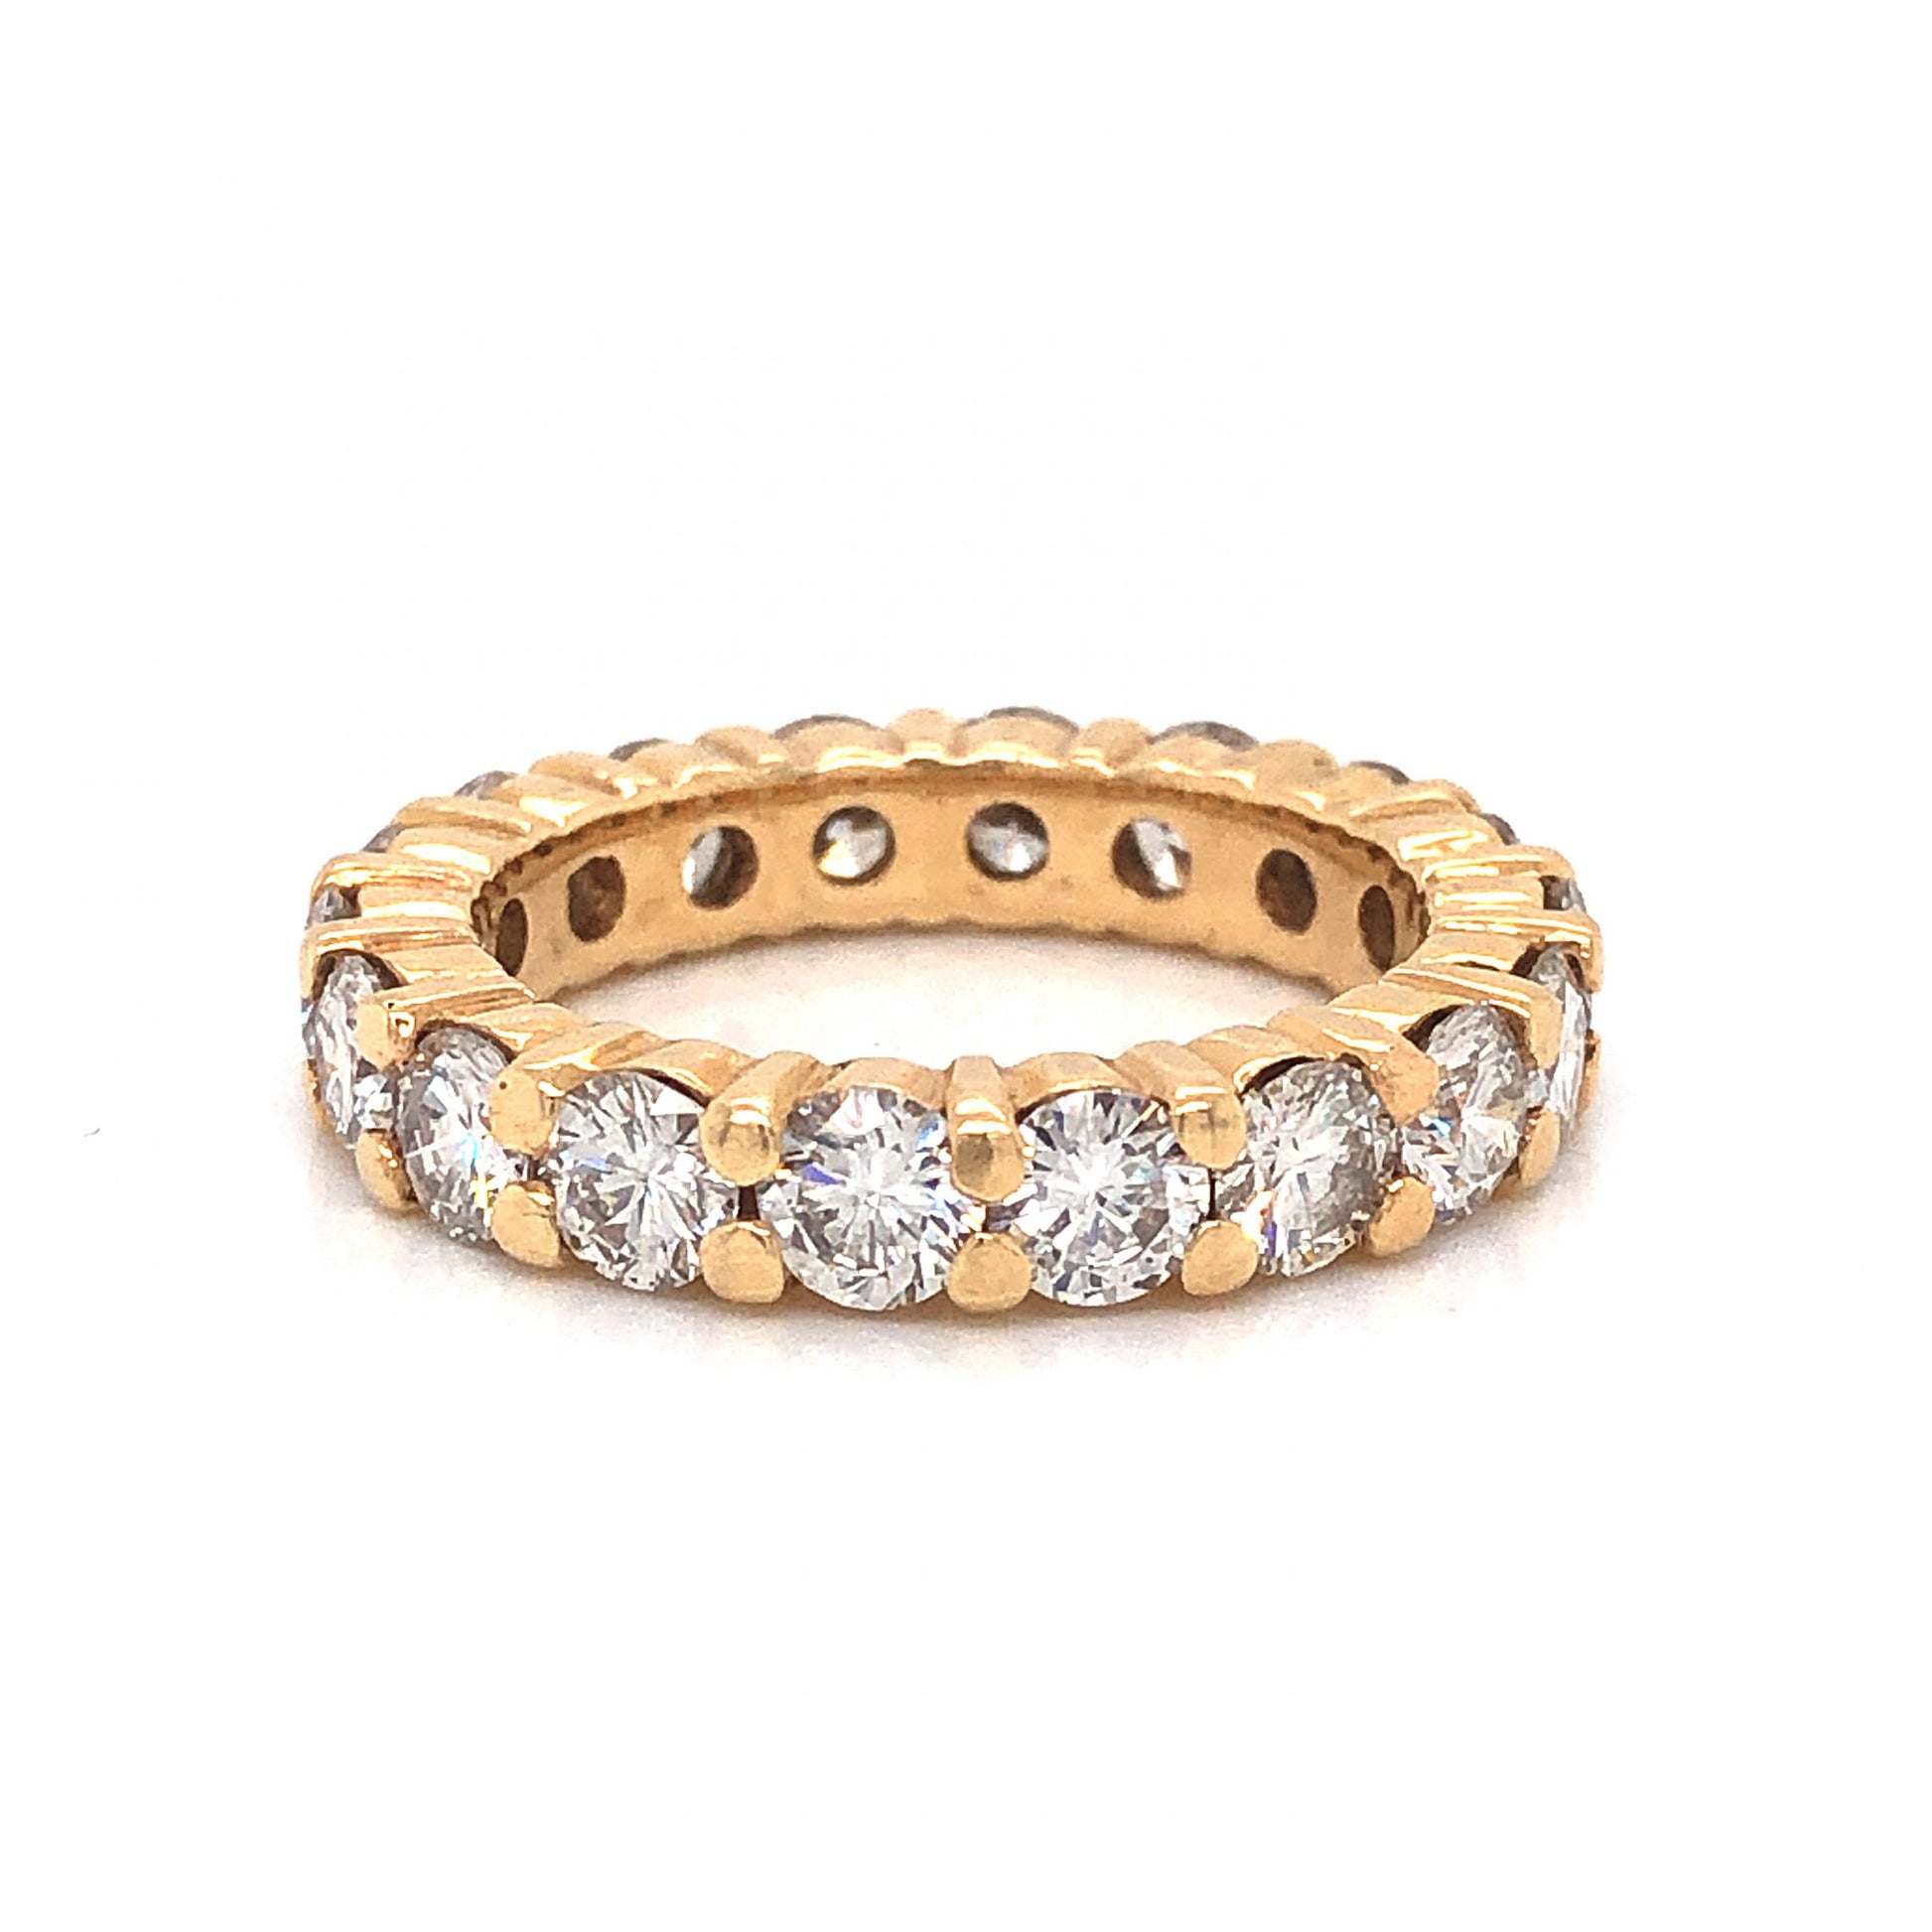 3.80 Diamond Eternity Band in 14k Yellow GoldComposition: 14 Karat Yellow Gold Ring Size: 6 Total Diamond Weight: 3.80ct Total Gram Weight: 5.4 g